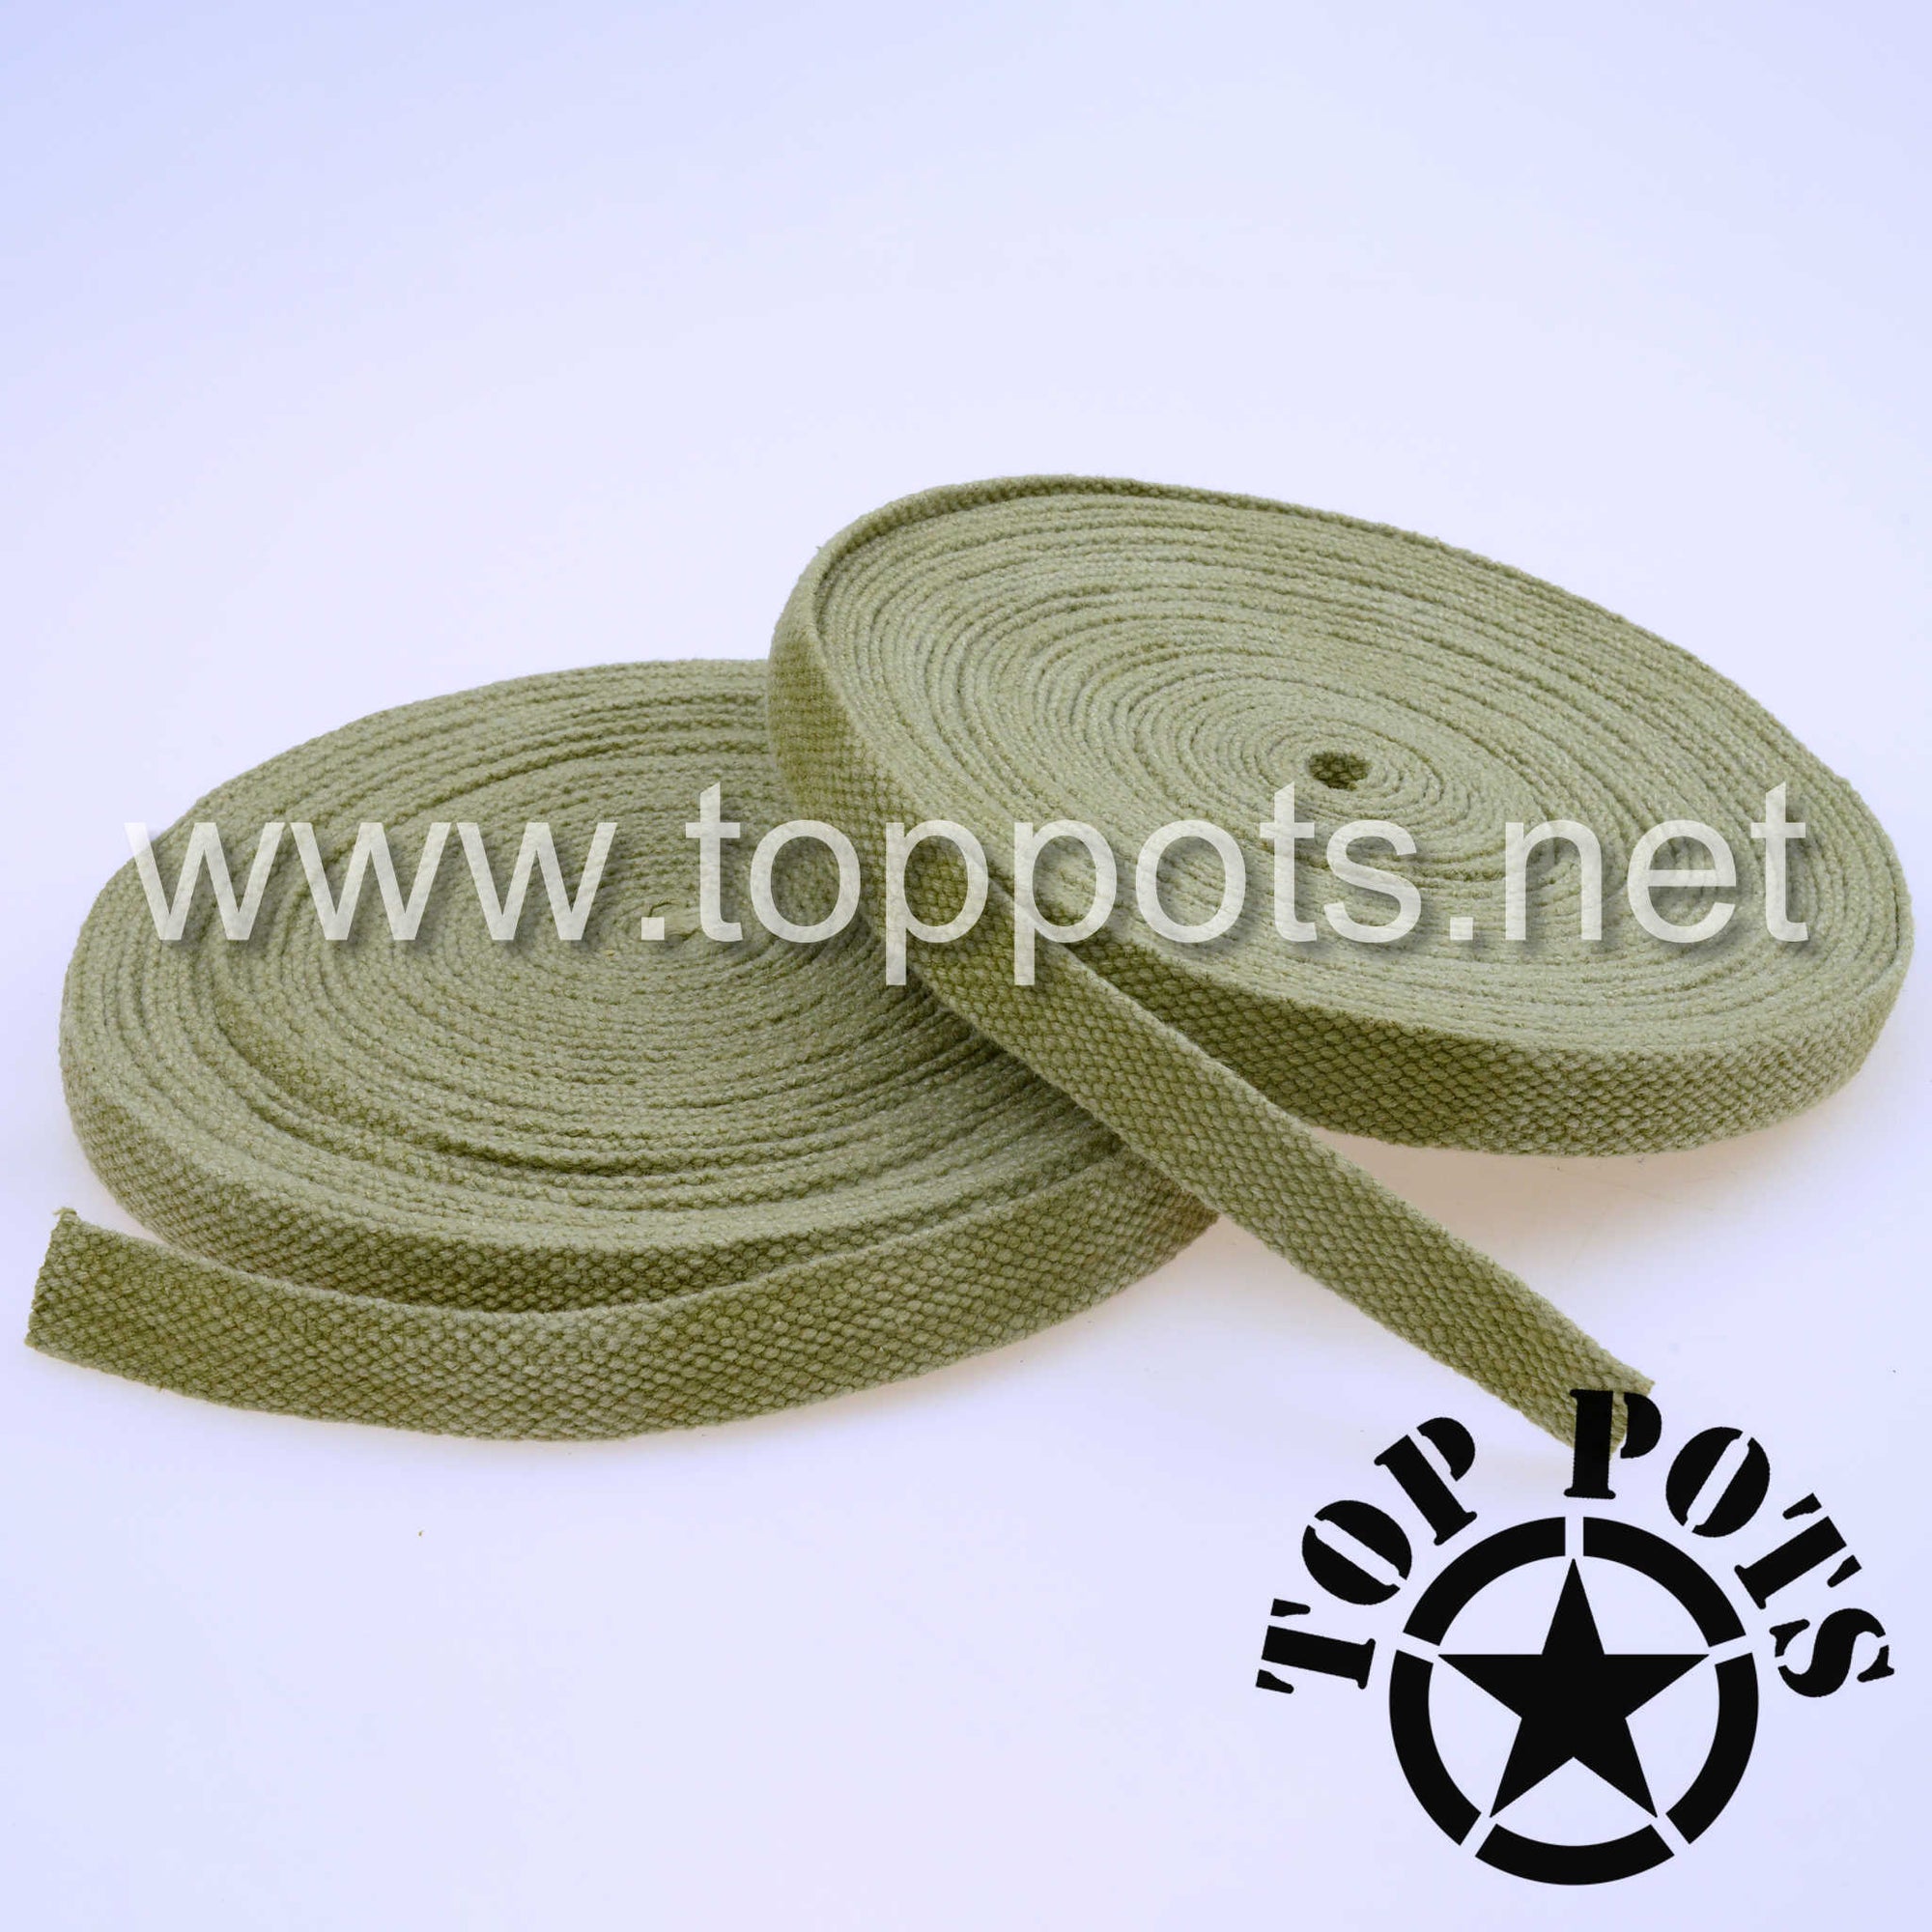 WWII US Army M1C Paratrooper Helmet Liner Cotton Olive Drab 3 A Strap Webbing - Shuttle Loom (Old Stock)